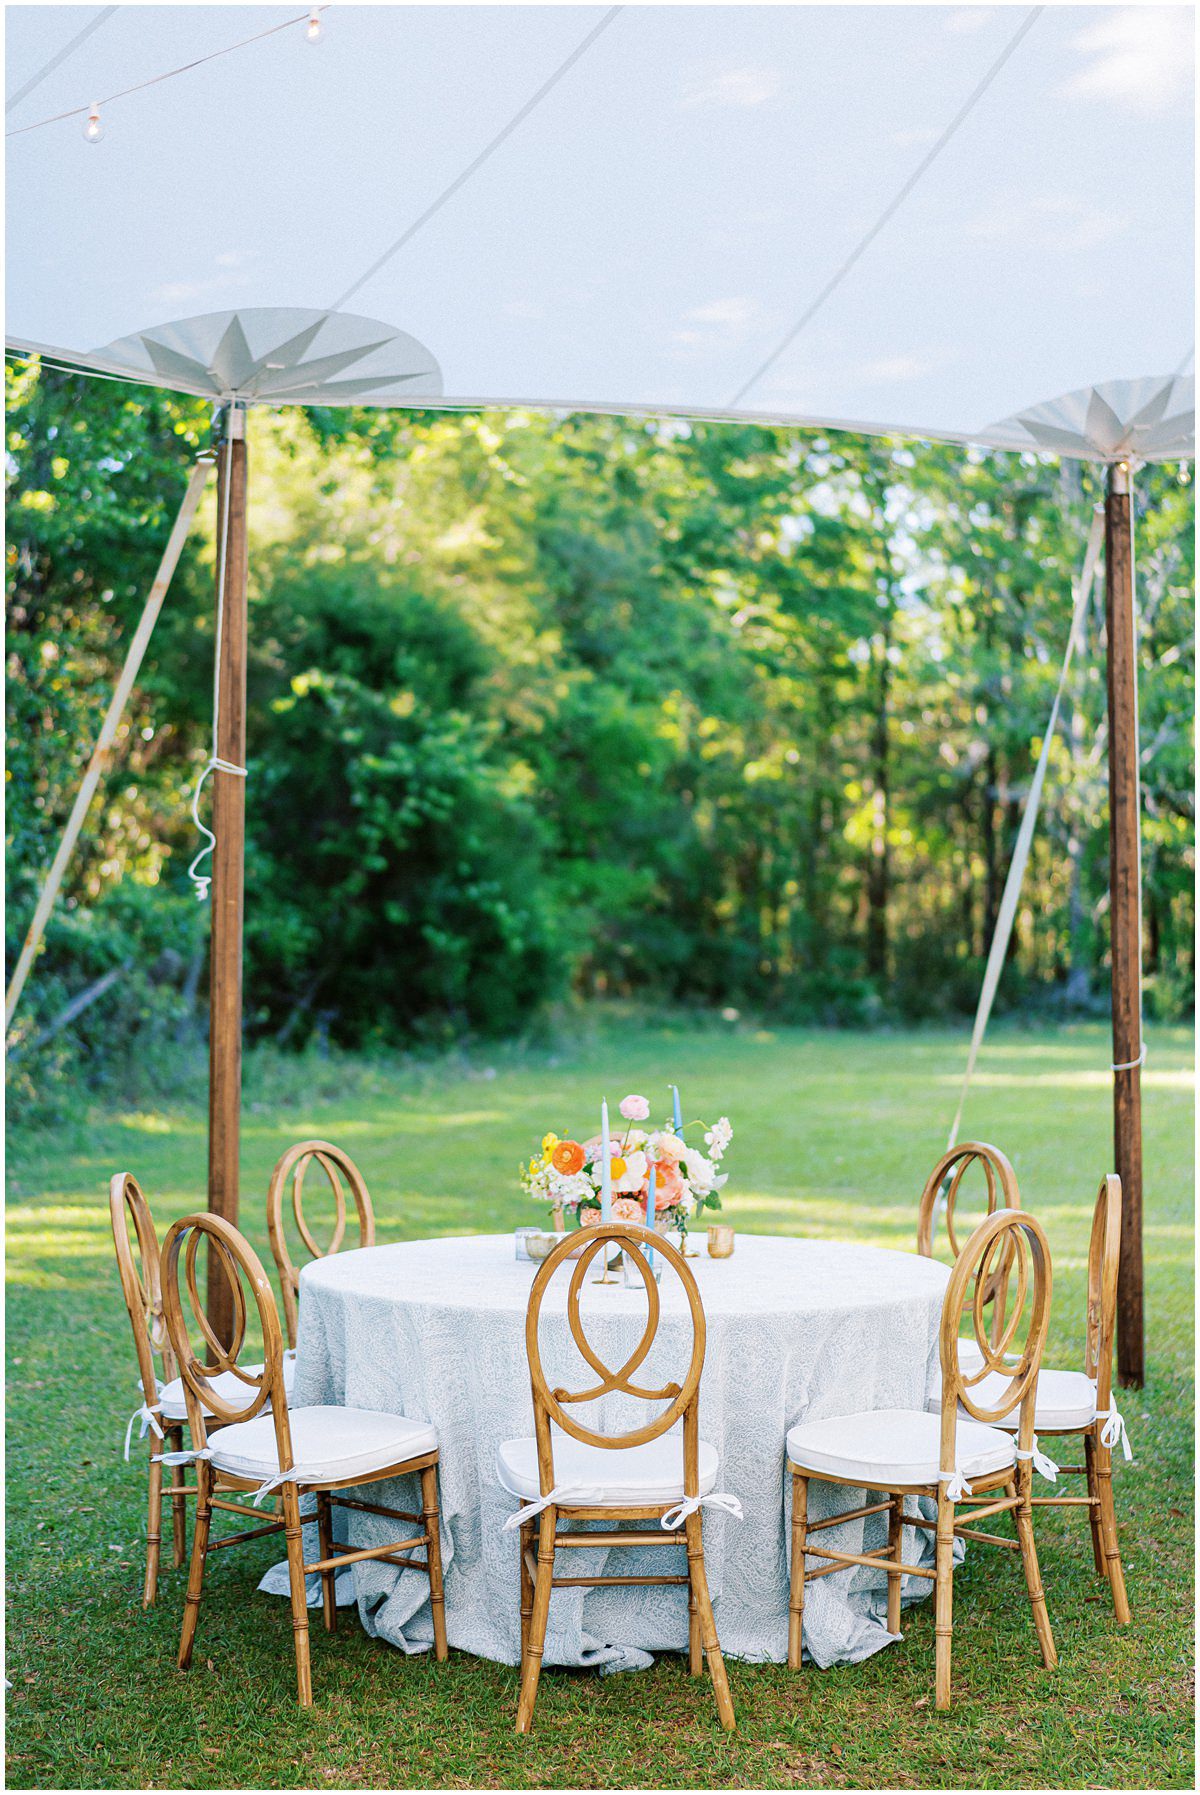 sail cloth tent wedding reception at a private estate designed by Meagan Warren Events